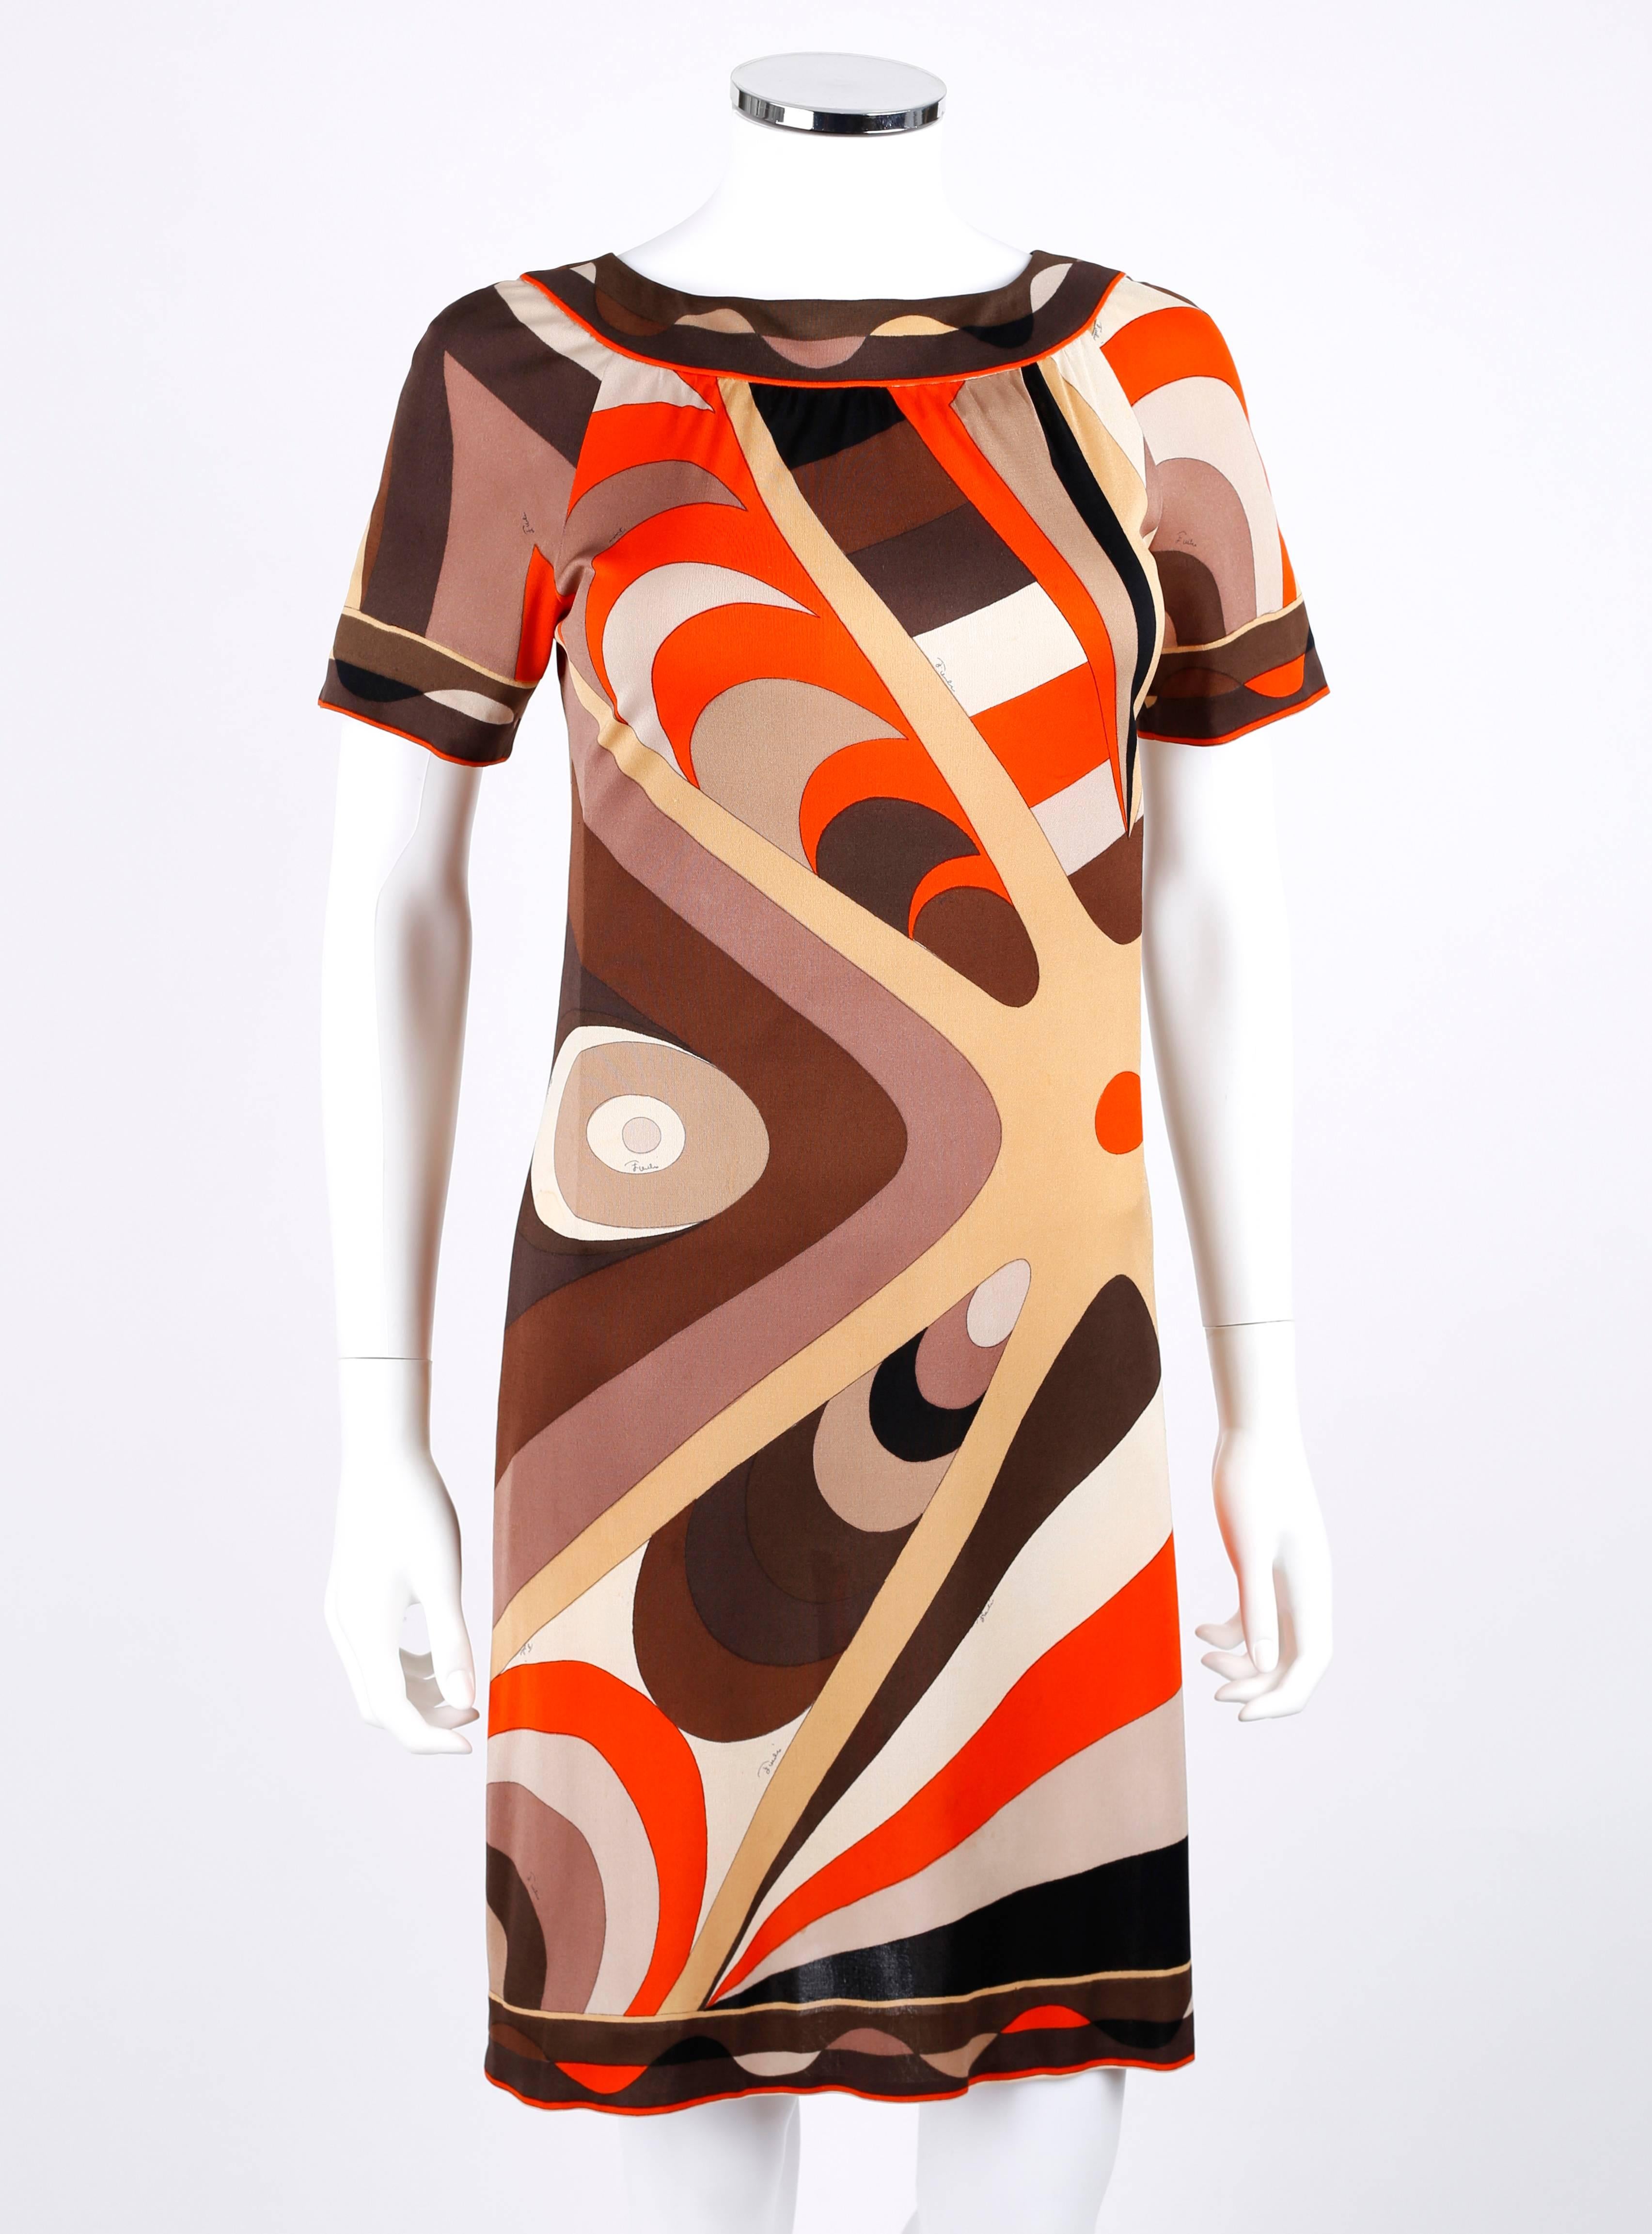 Vintage c.1960's Emilio Pucci for Neiman Marcus silk jersey shift dress. Abstract op art signature print in shades of brown, orange, gray, and black. Short raglan sleeves. Boat neckline. Off center invisible zipper with hook and eye closure at back.